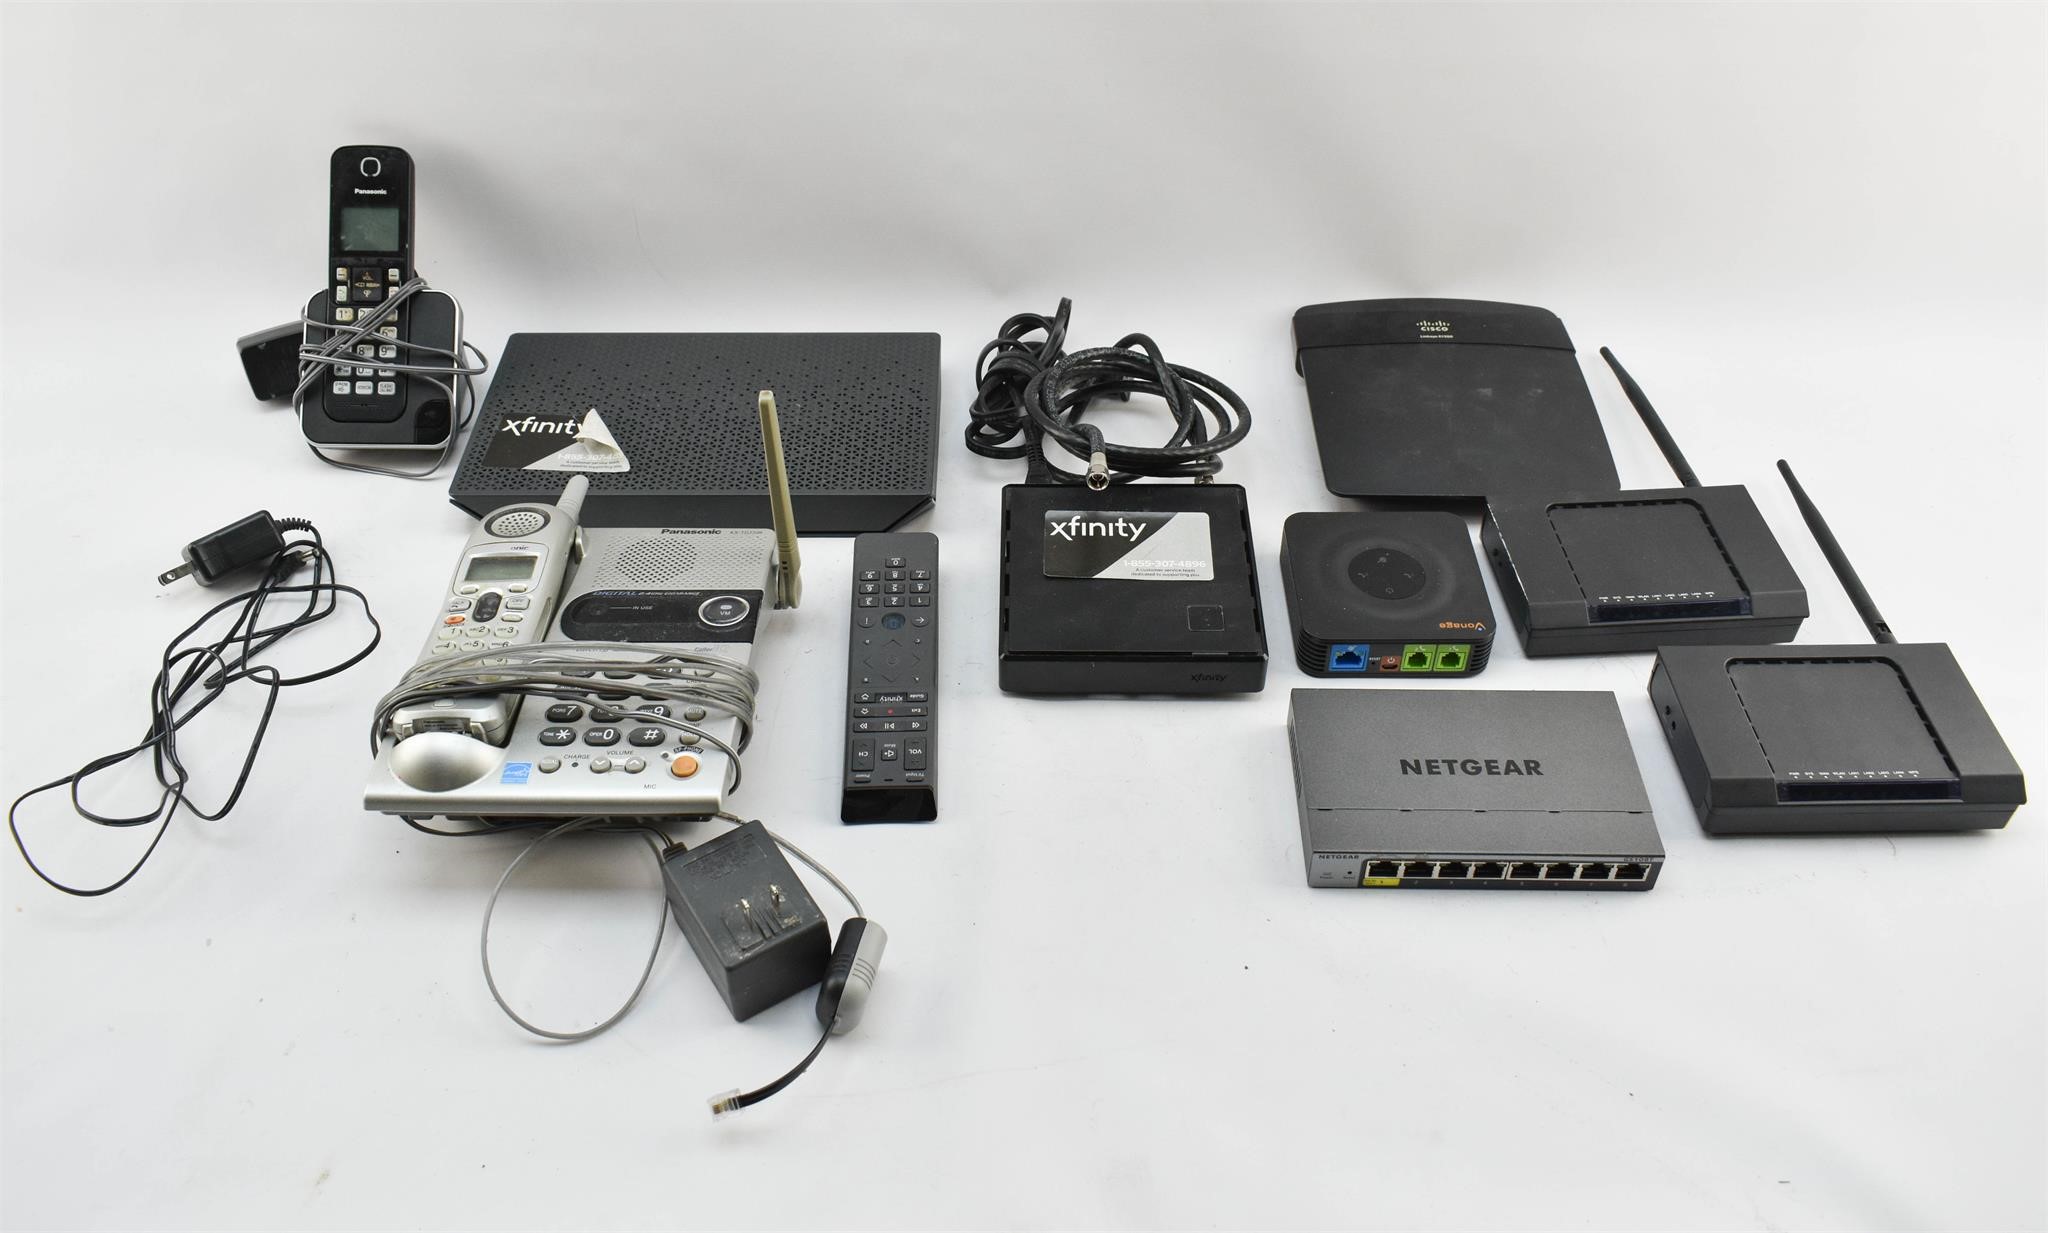 9 Assorted Phone and Internet Objects